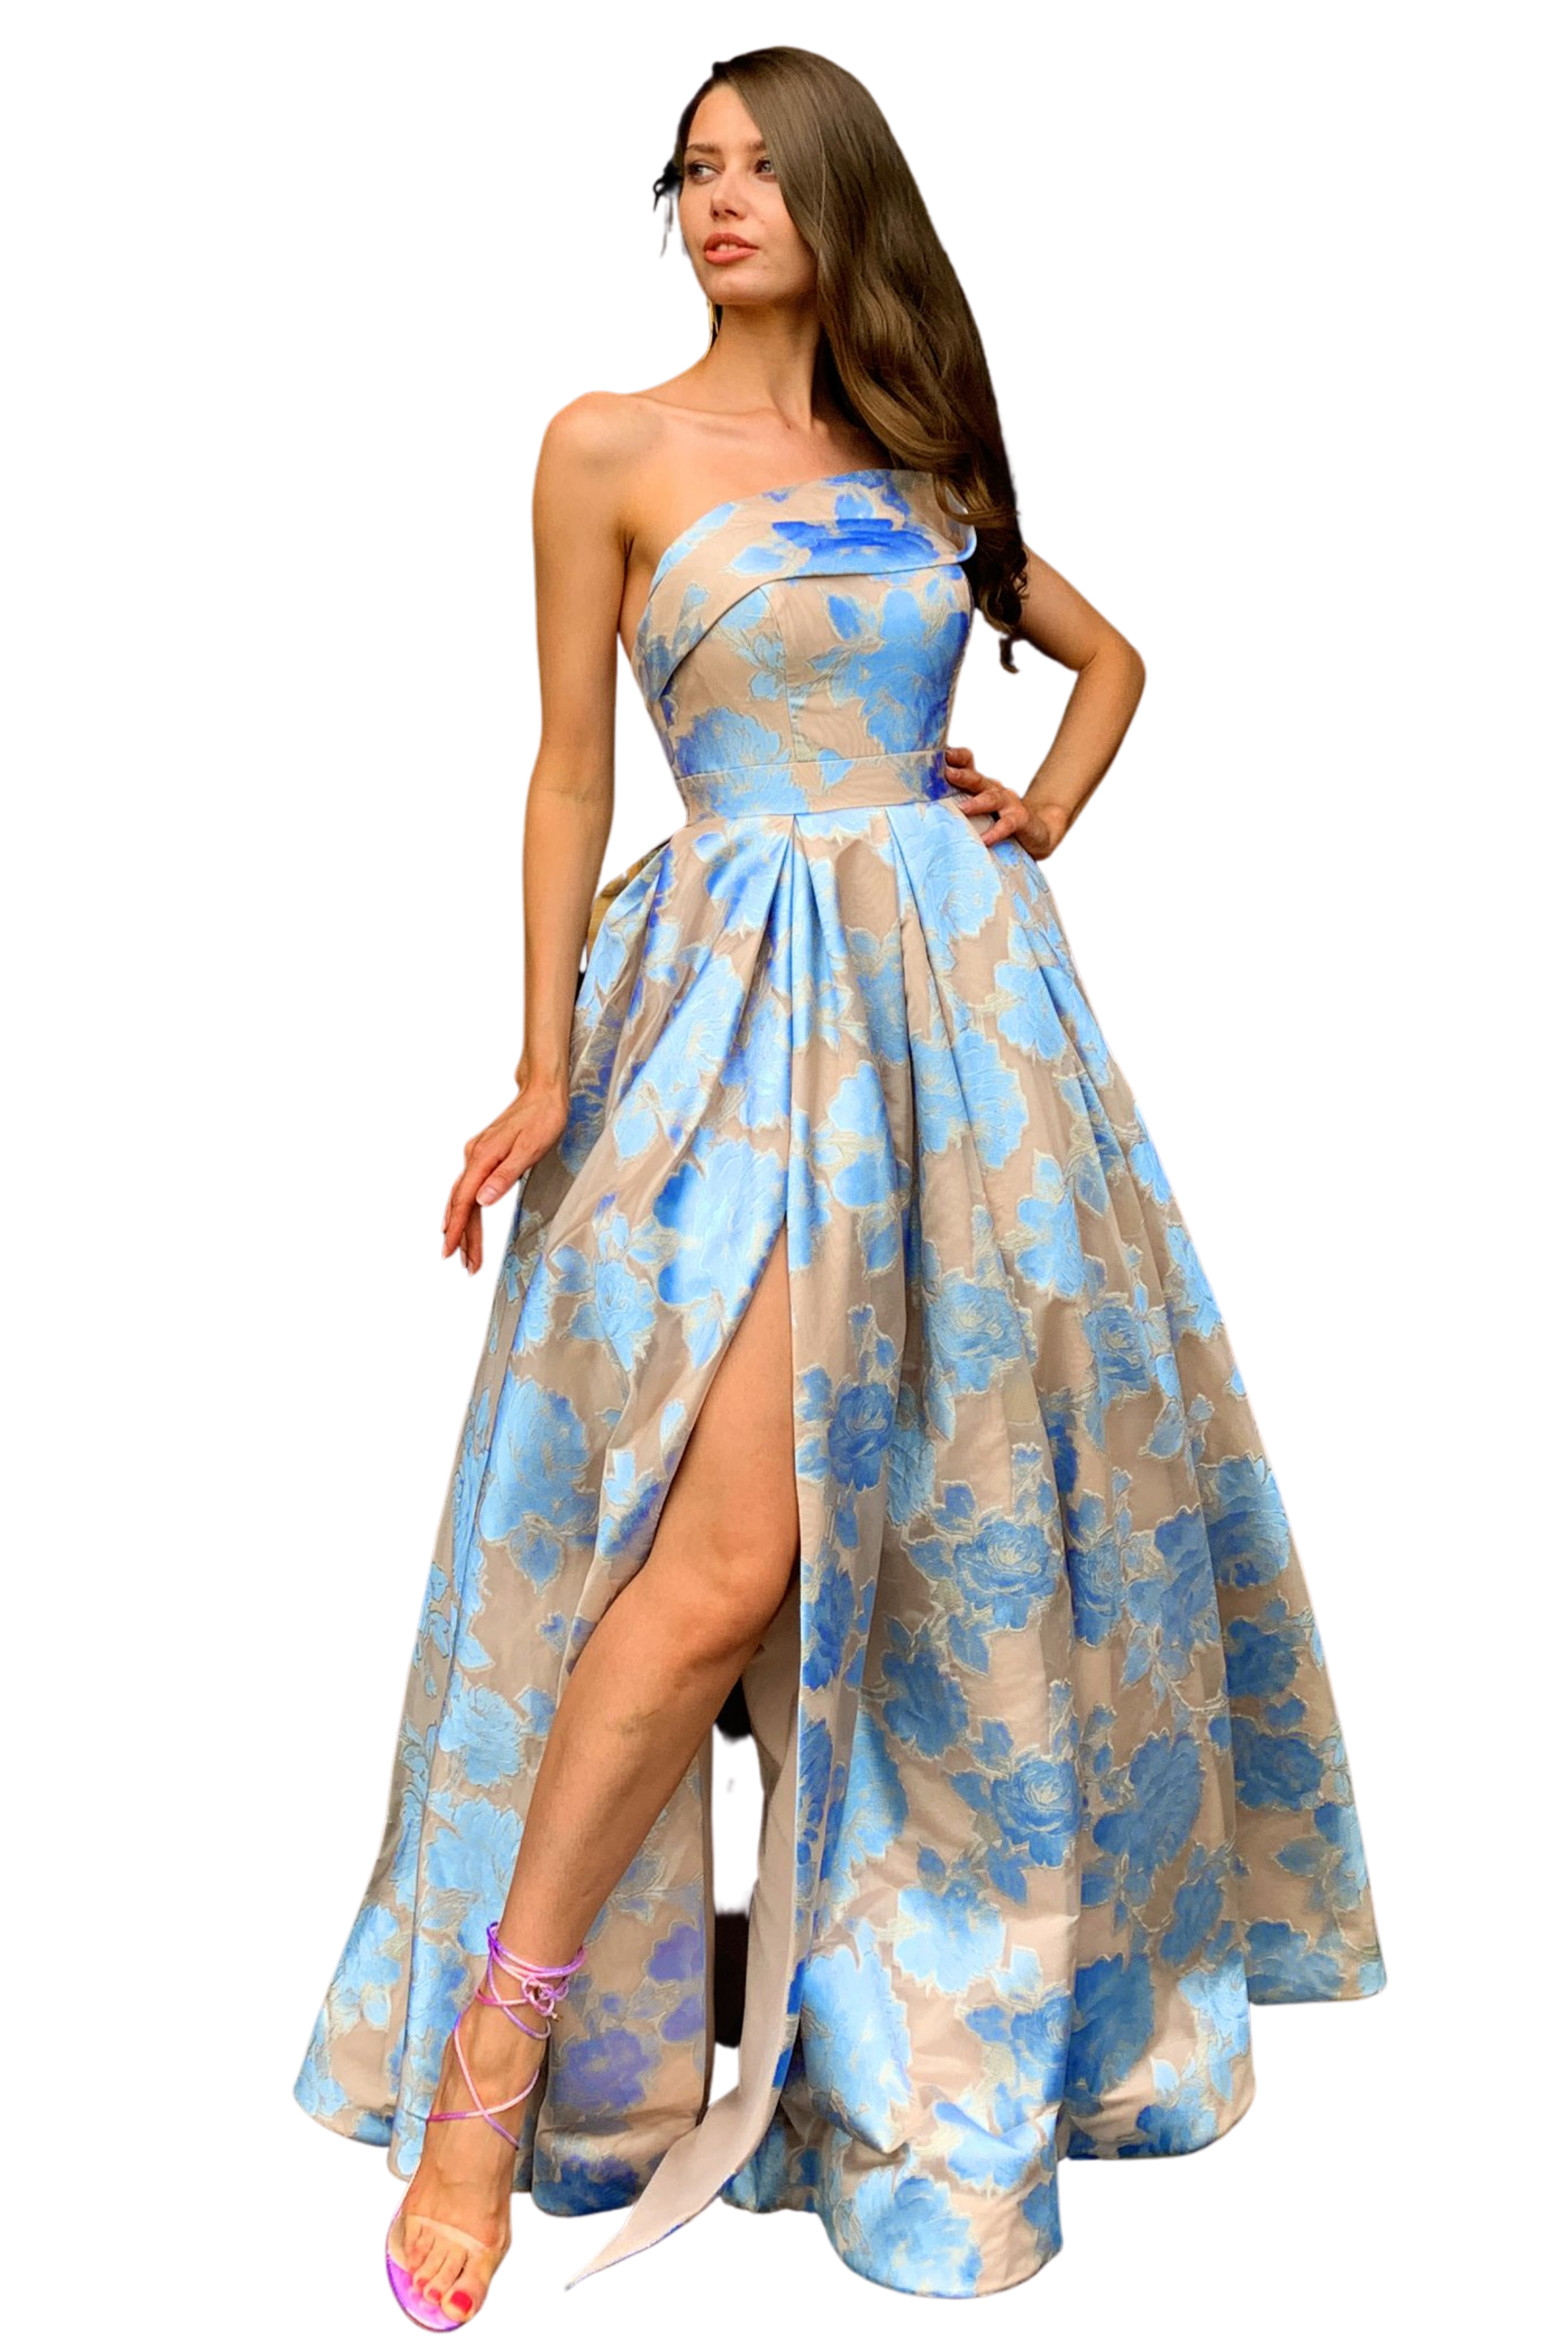 Tinaholy TINAHOLLY Anastasia T2010 (Pastel Blue) - RRP $629 - tinaholly-anastasia-t2010-pastel-blue---rrp-9-dress-for-a-night-30756905.png